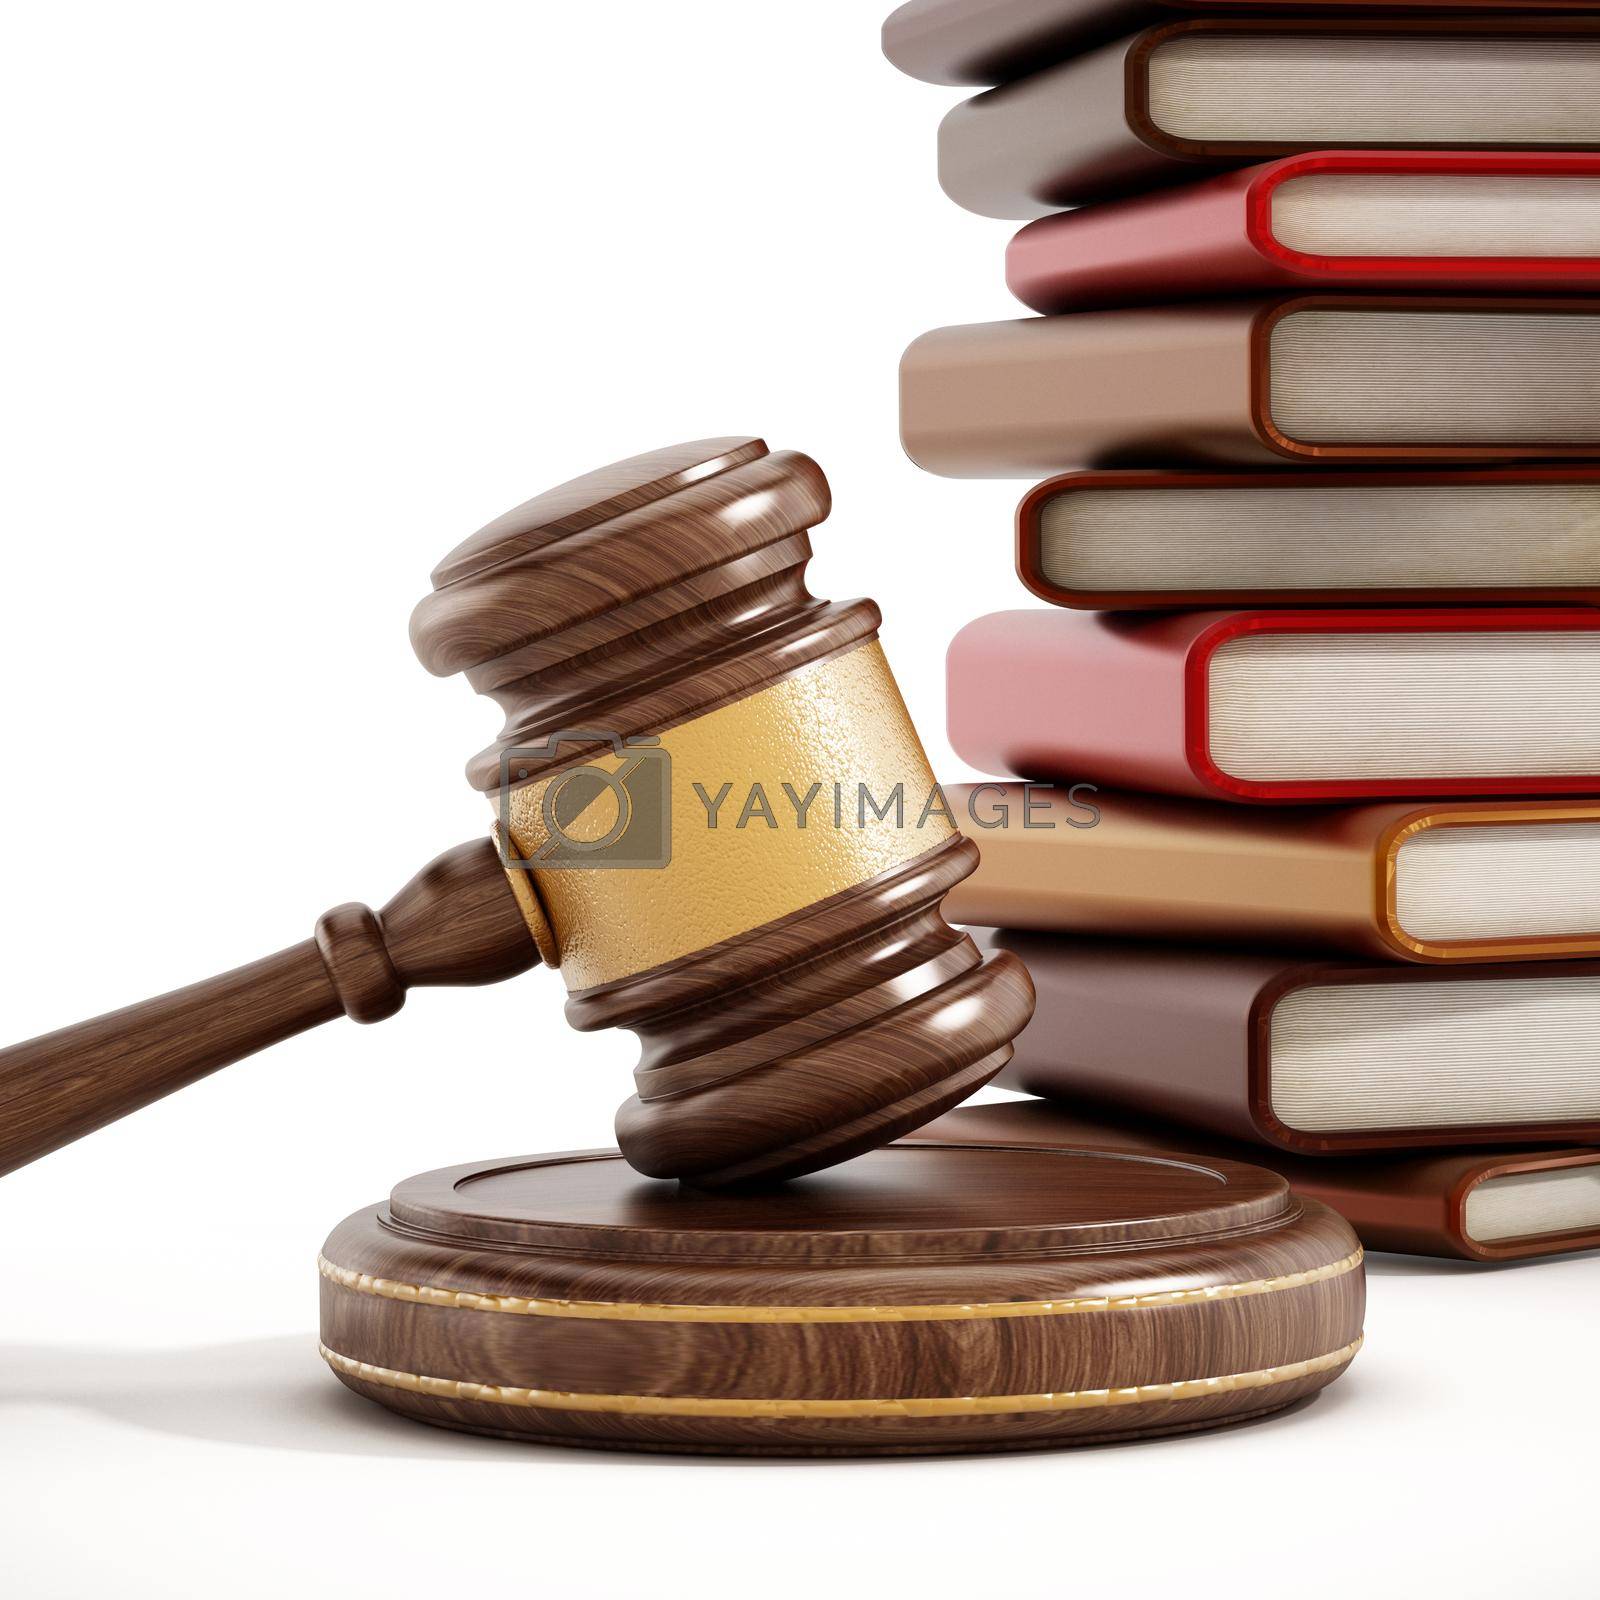 Royalty free image of Gavel and books by Simsek